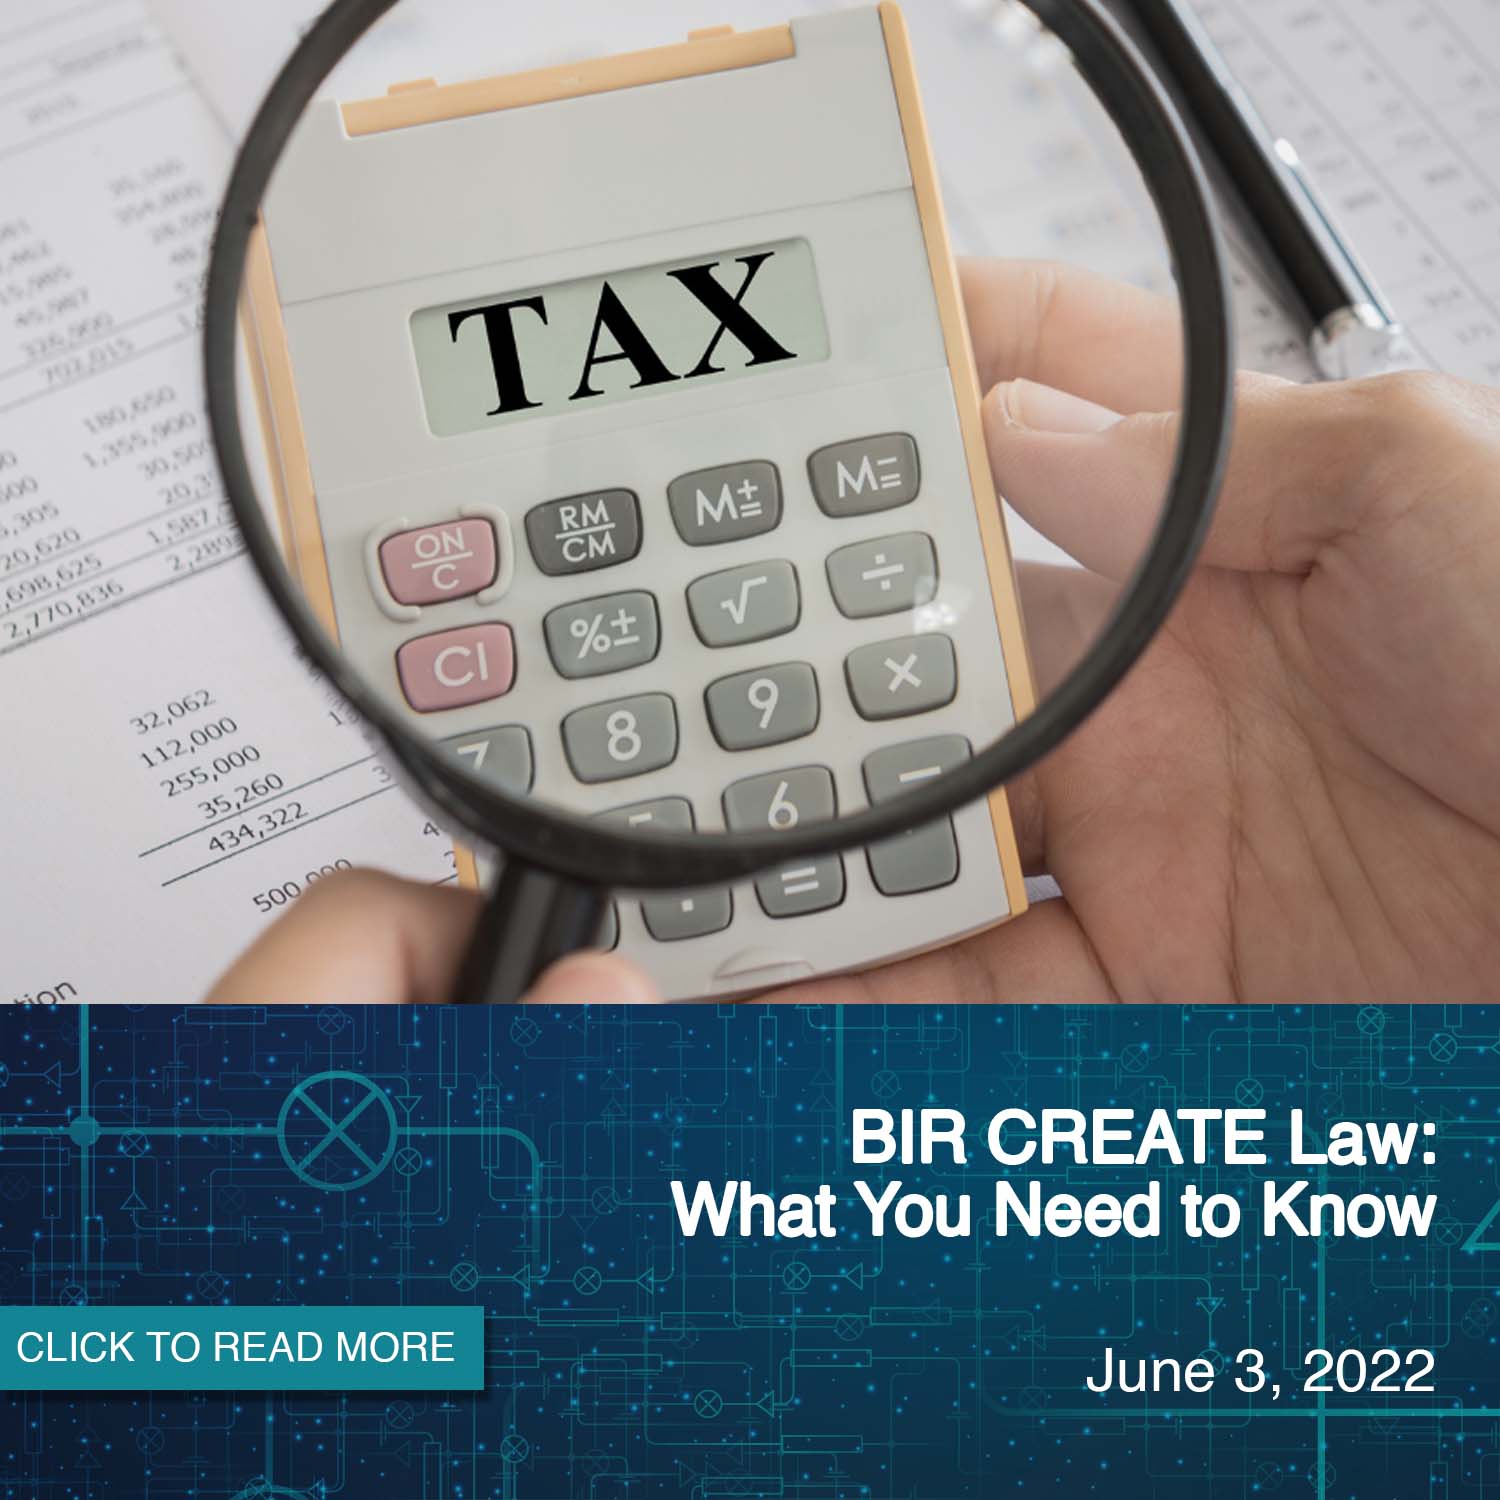 BIR CREATE Law: What You Need to Know